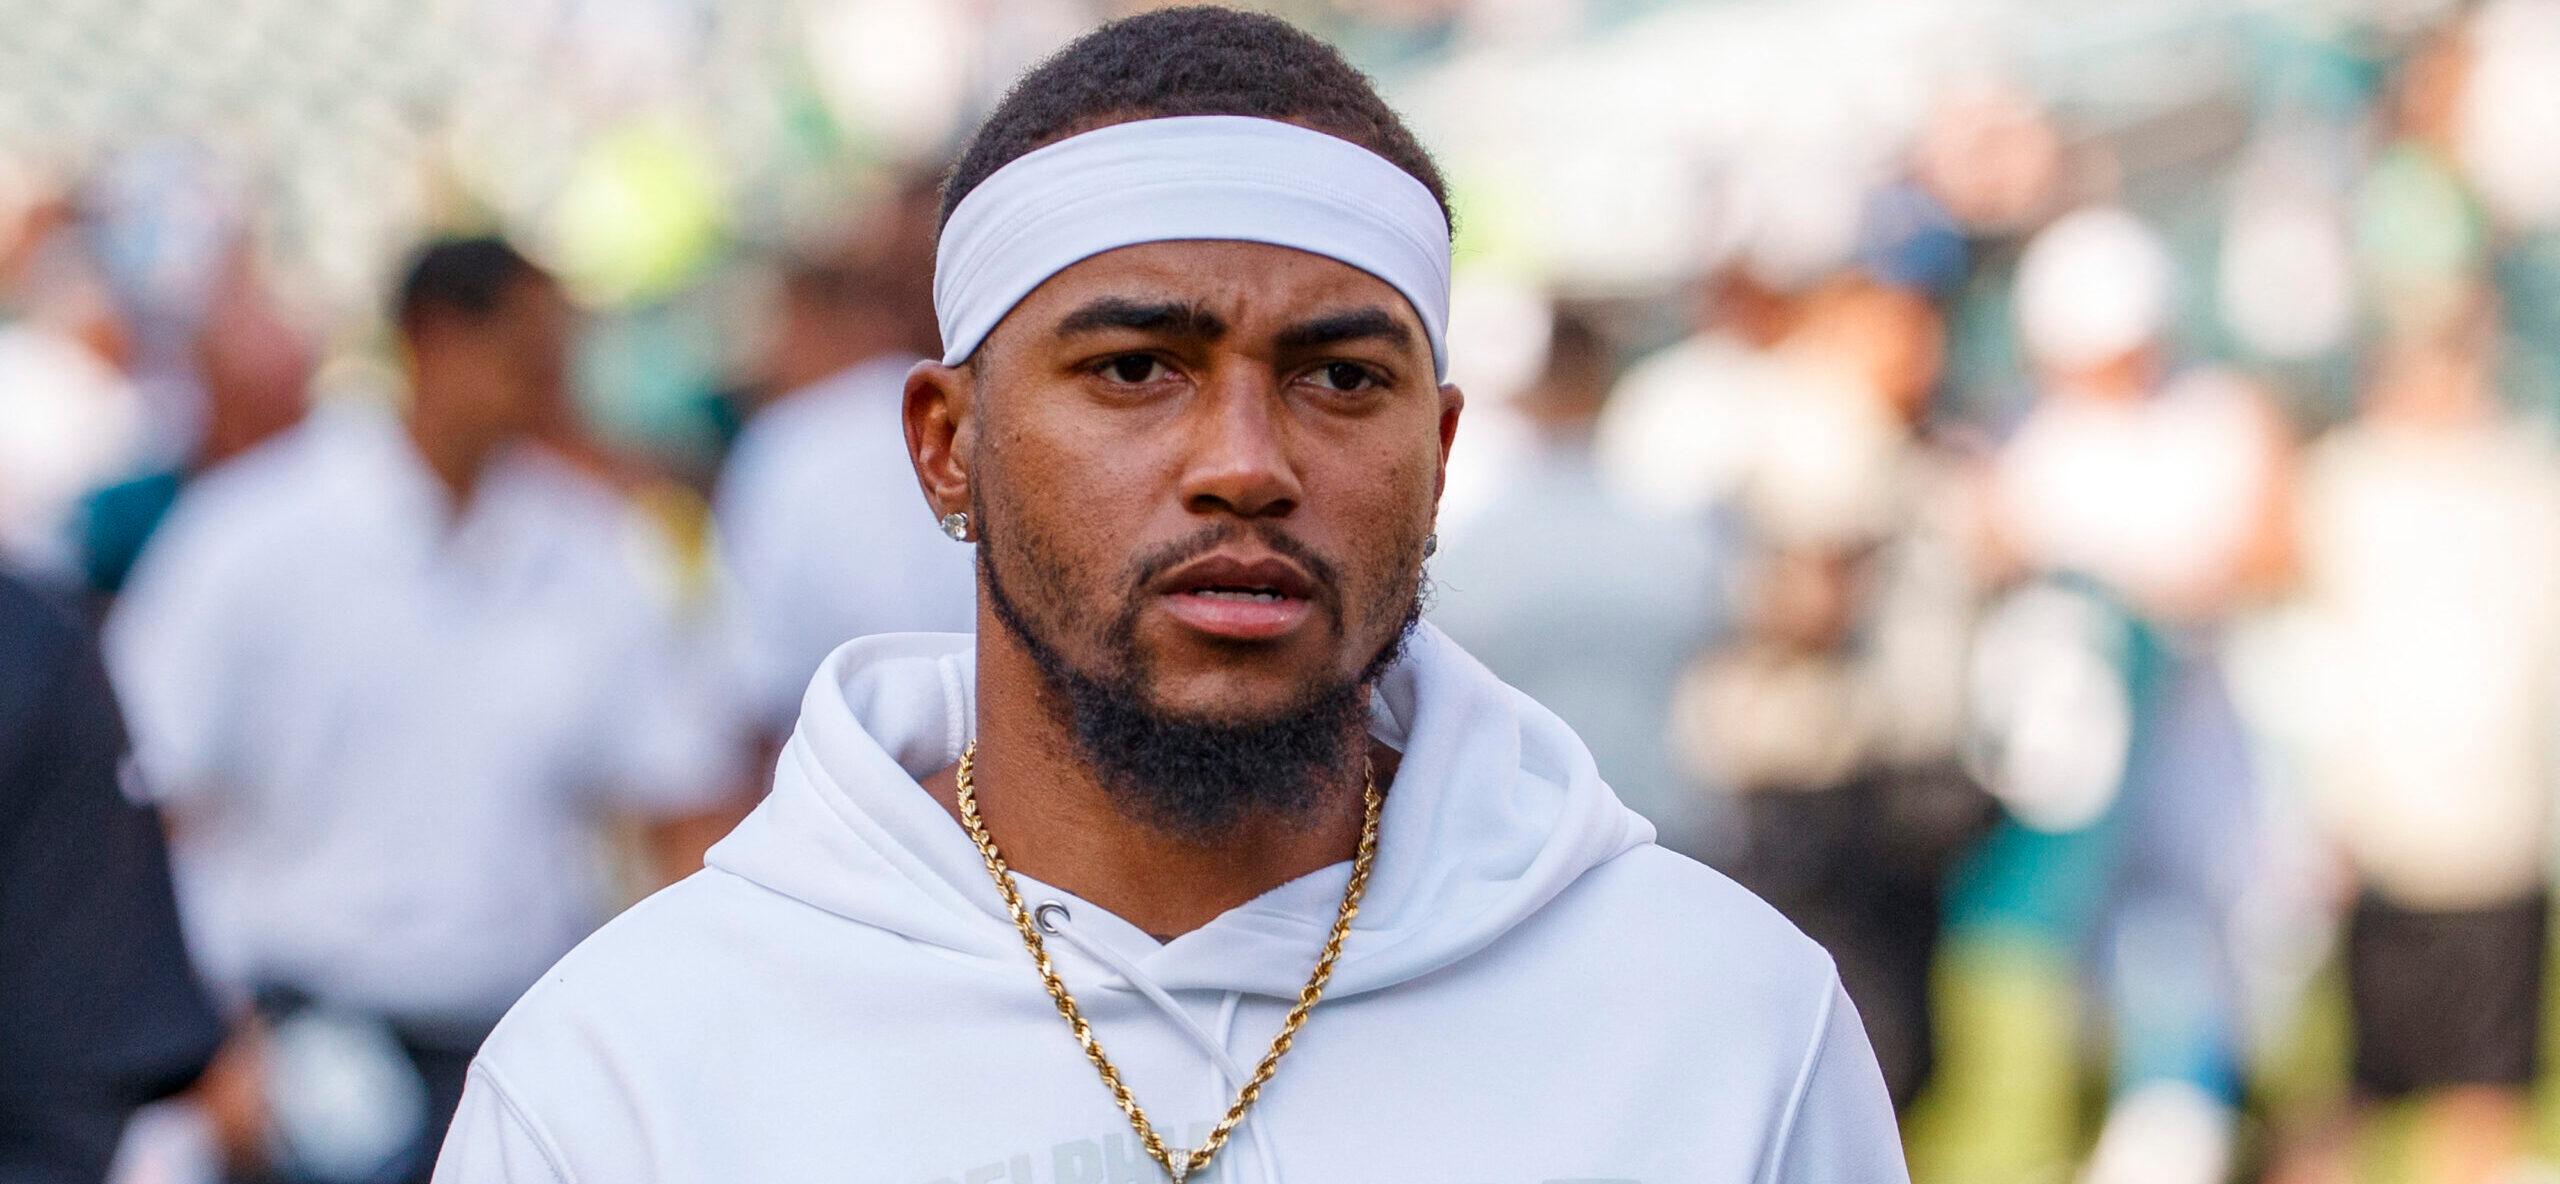 DeSean Jackson Files For Full Custody Of Kids, Claims Ex Is ‘Brainwashed’ By A ‘Cult’